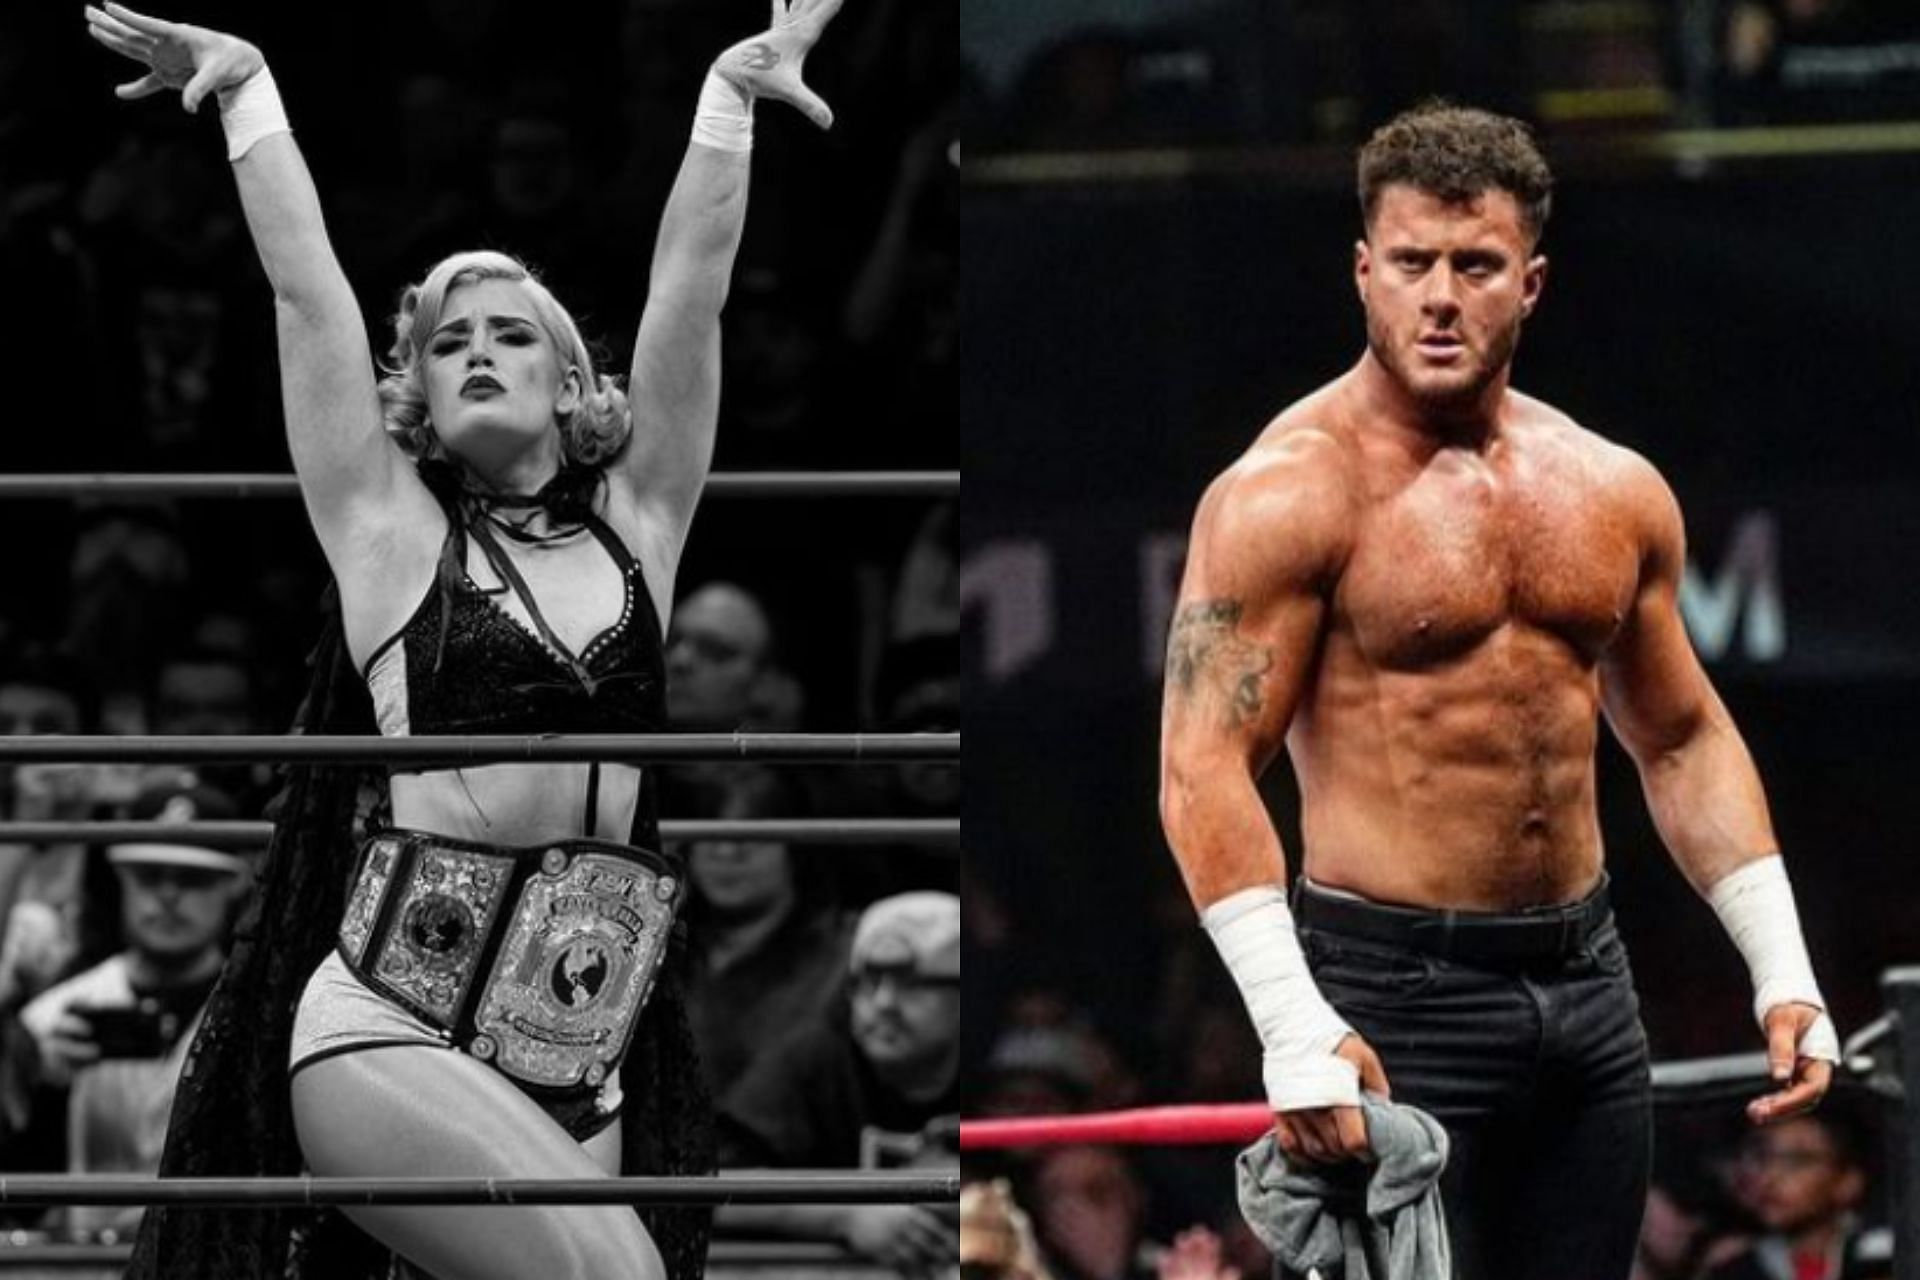 Some other surprises Tony Khan might spring at AEW: Big Business [Image Source: Toni Storm and MJF Instagram]